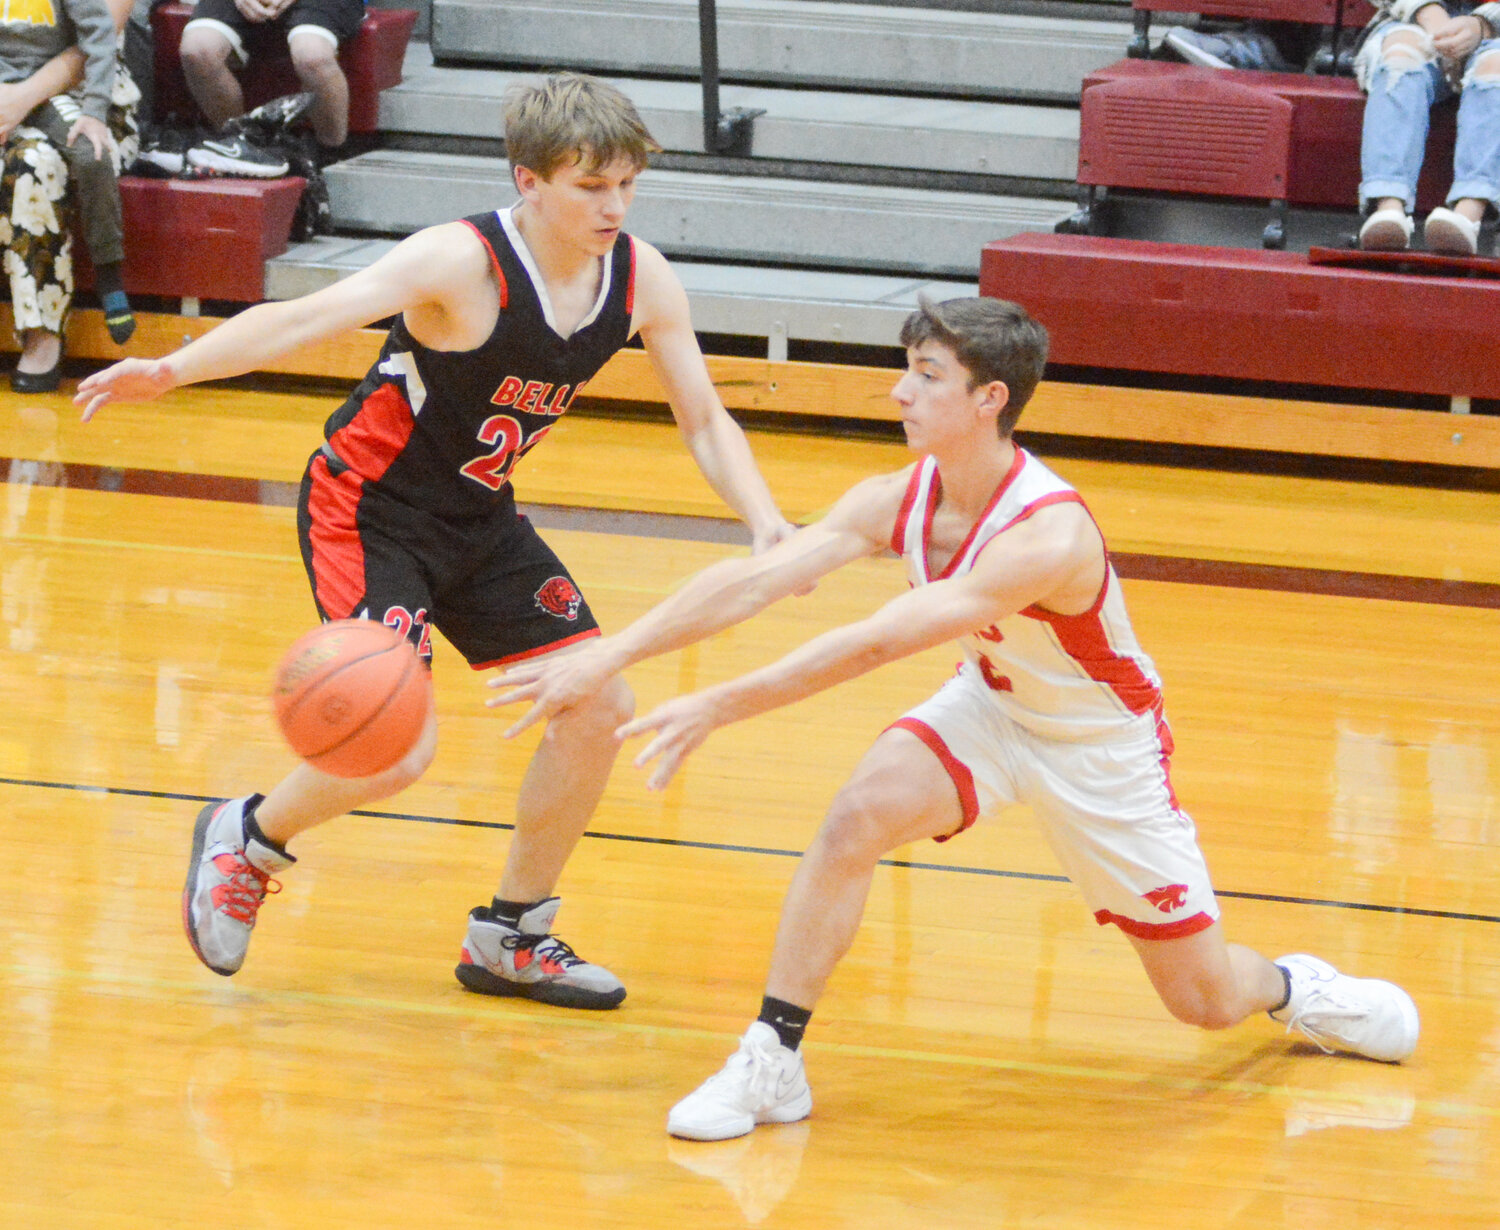 Gus Peters sends the ball inside during a recent game.